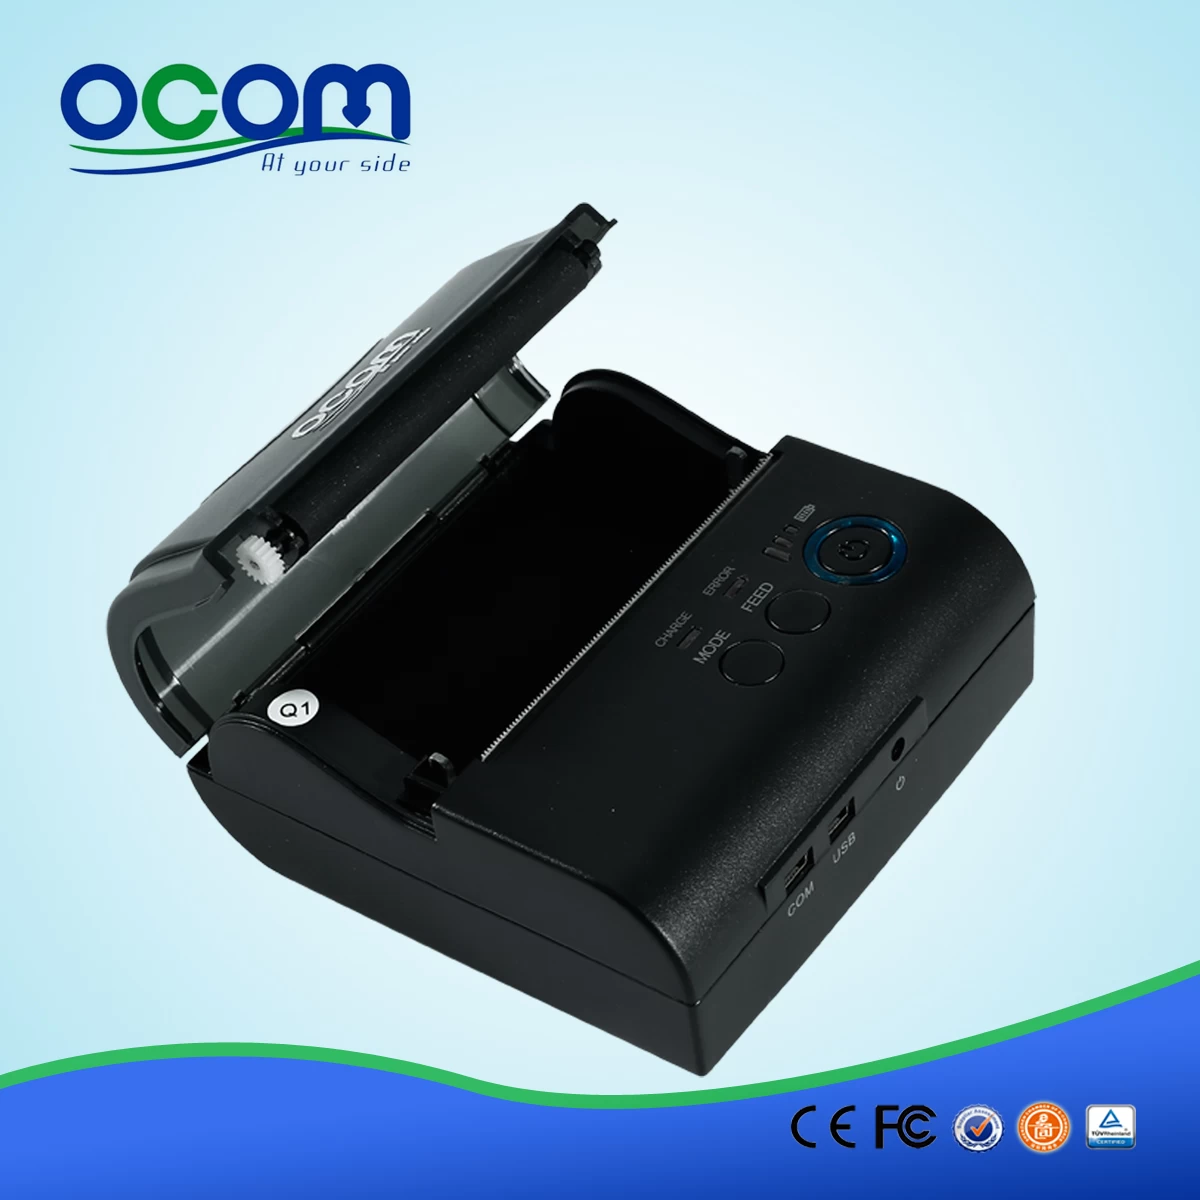 Chargeable Battery Powered Portable Android Thermal Bluetooth USB Printer